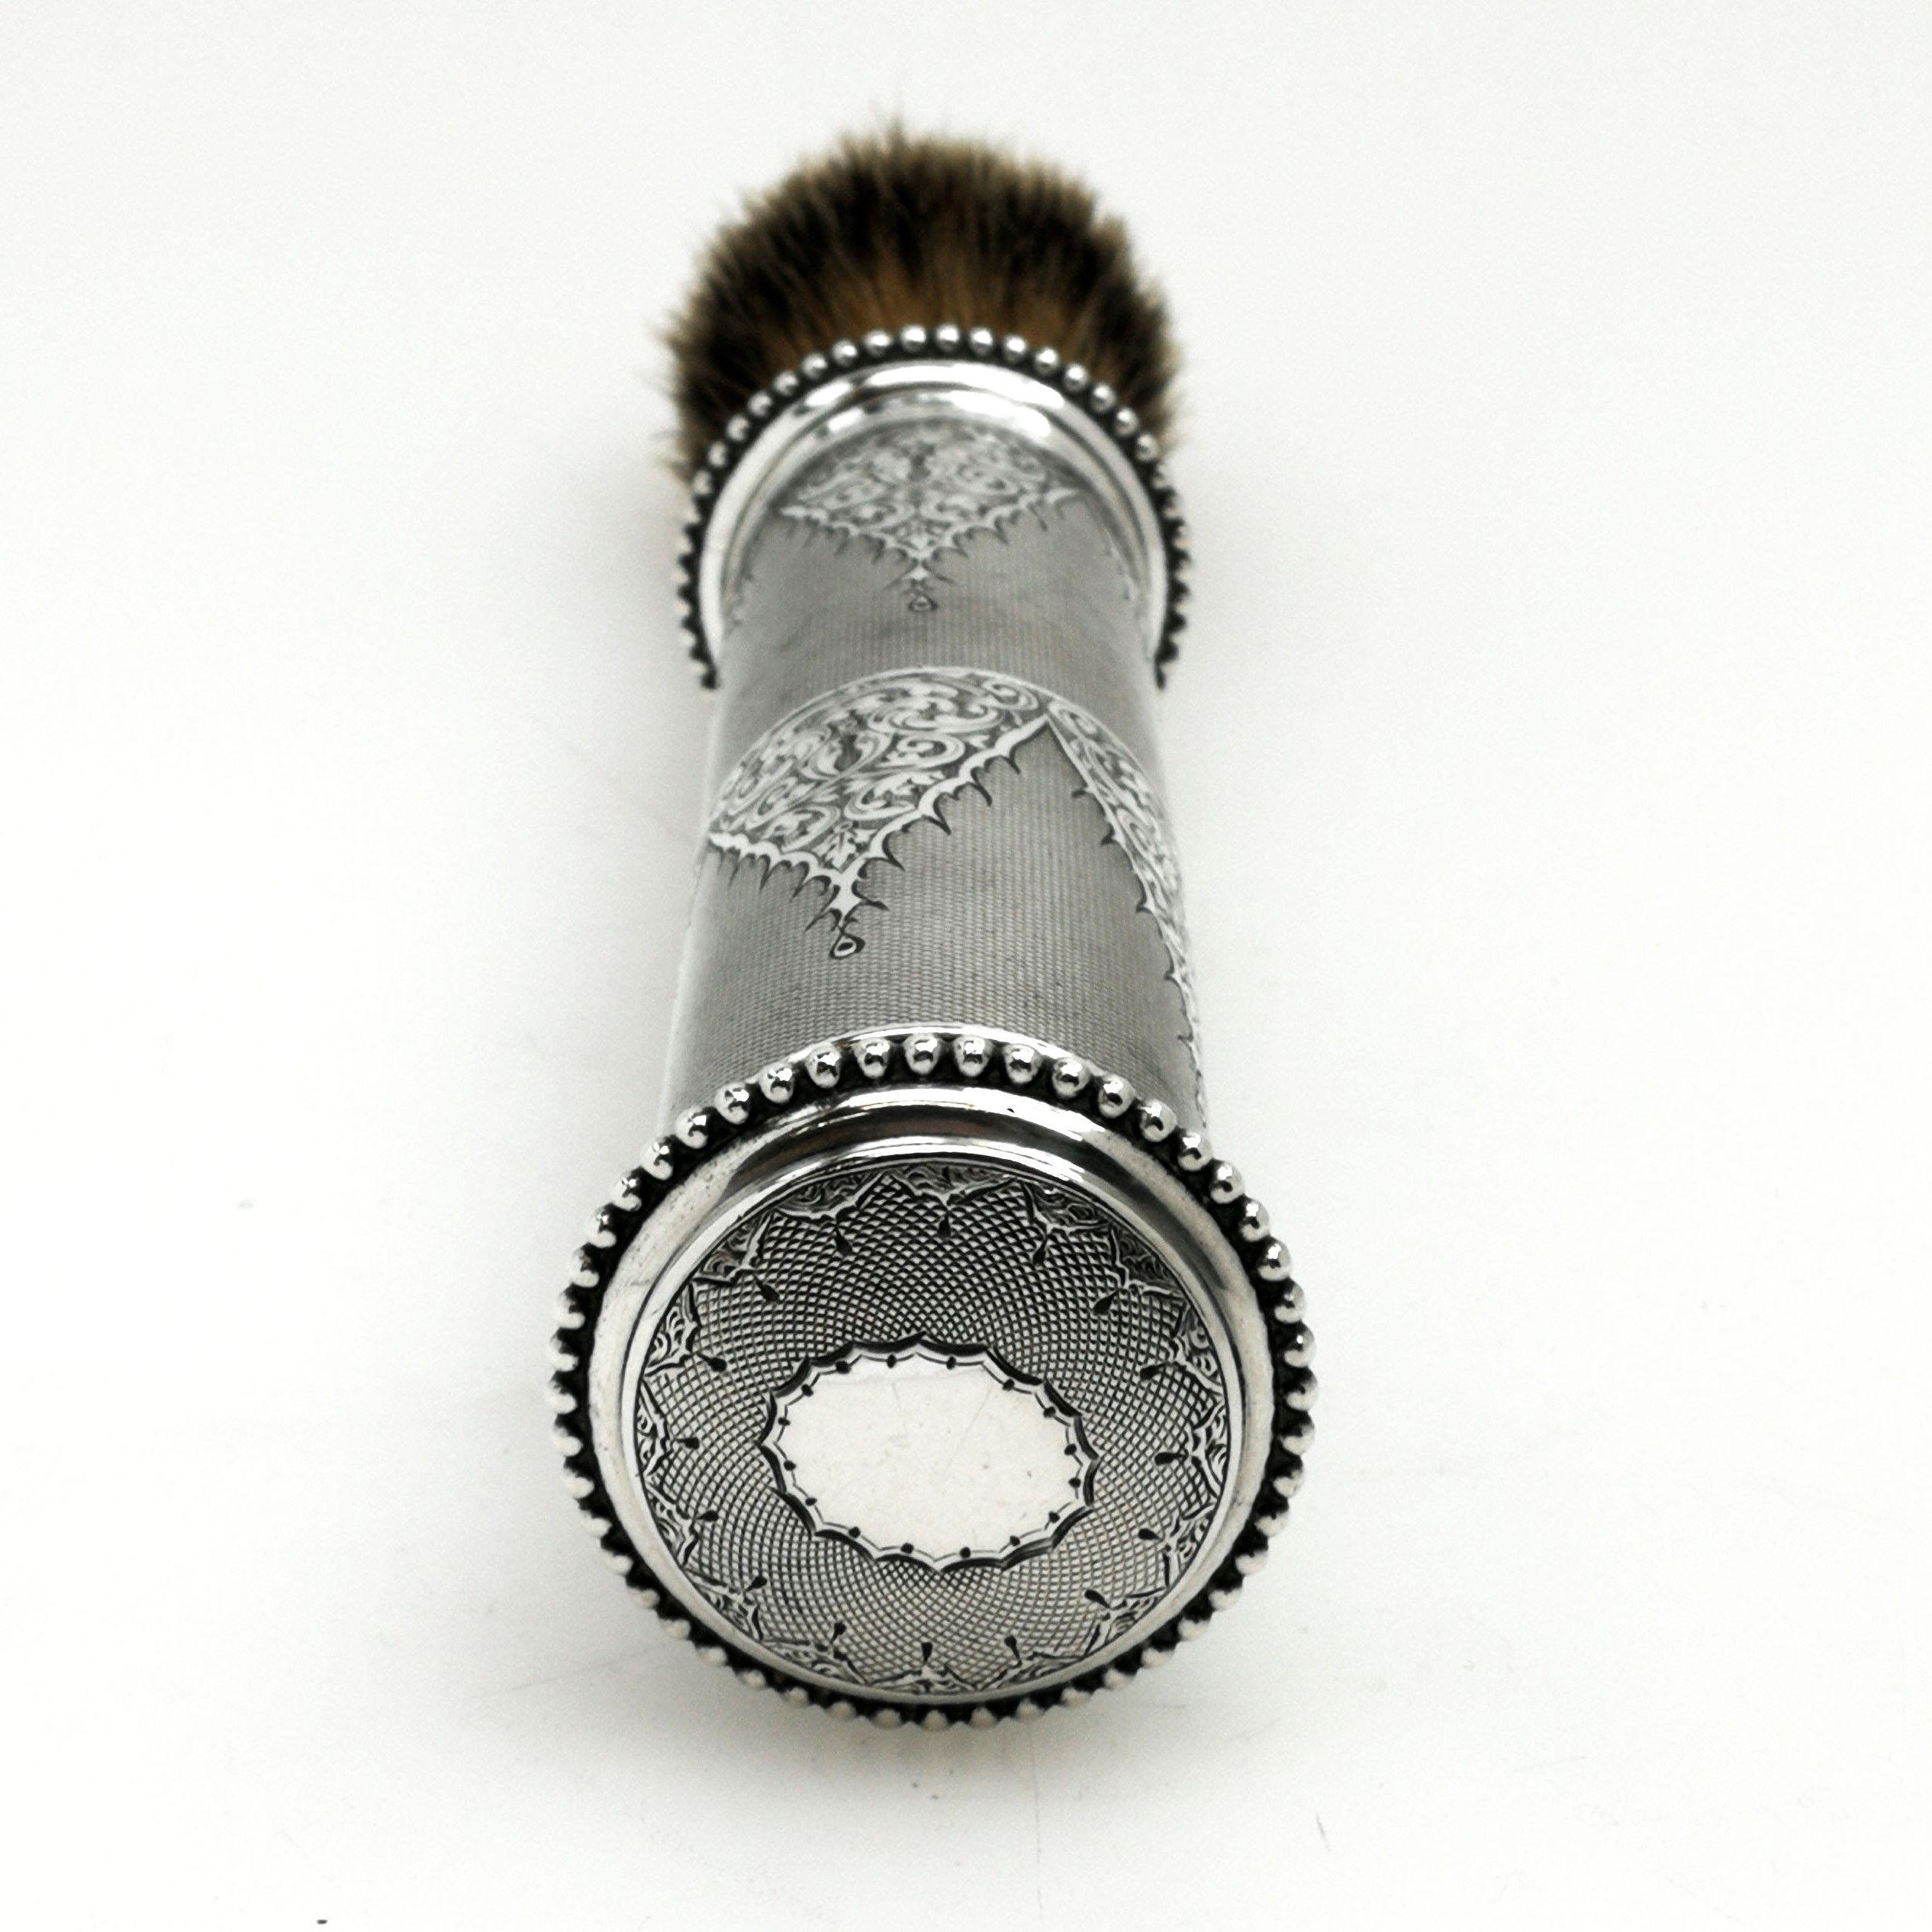 An amazing Antique Victorian Sterling Silver Shaving Brush / Travelling Shaving Brush Set that when closes is a secure case for a shaving brush with room to store some soap. Once unscrewed and re assembled, the shaving brush has a nice long handle